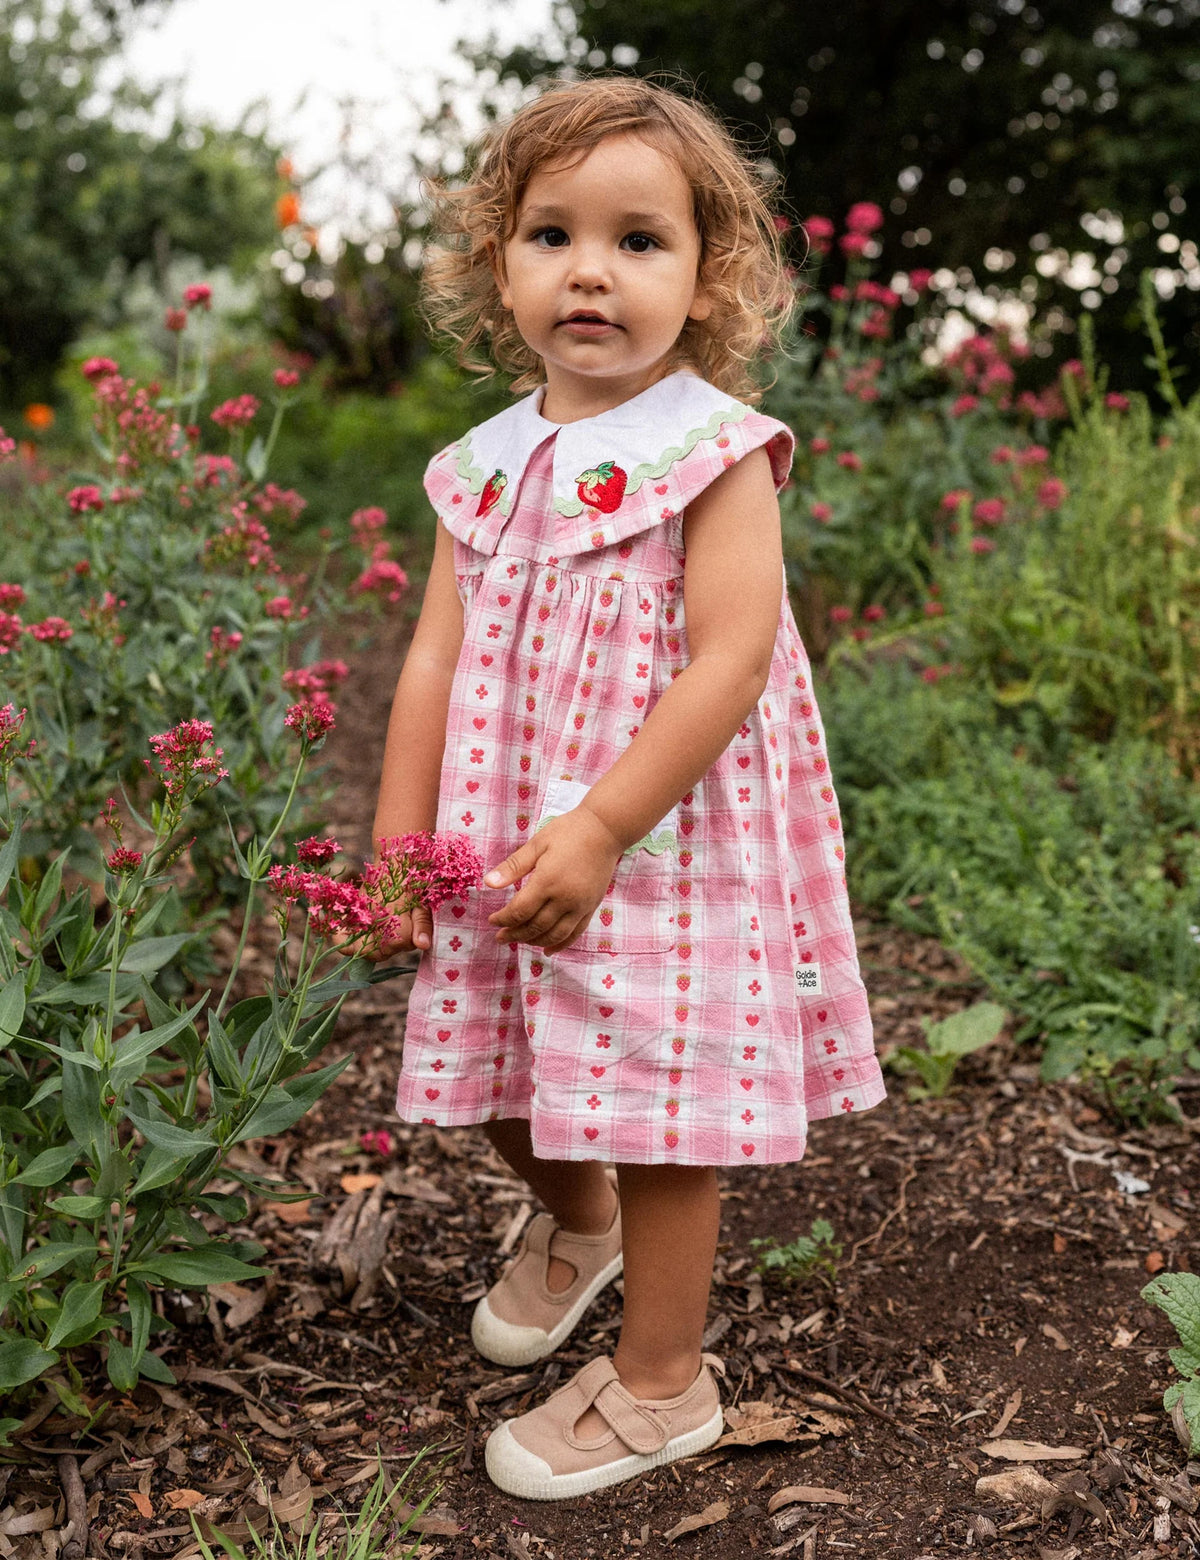 goldie + ace lucy collared very berry gingham dress - pink